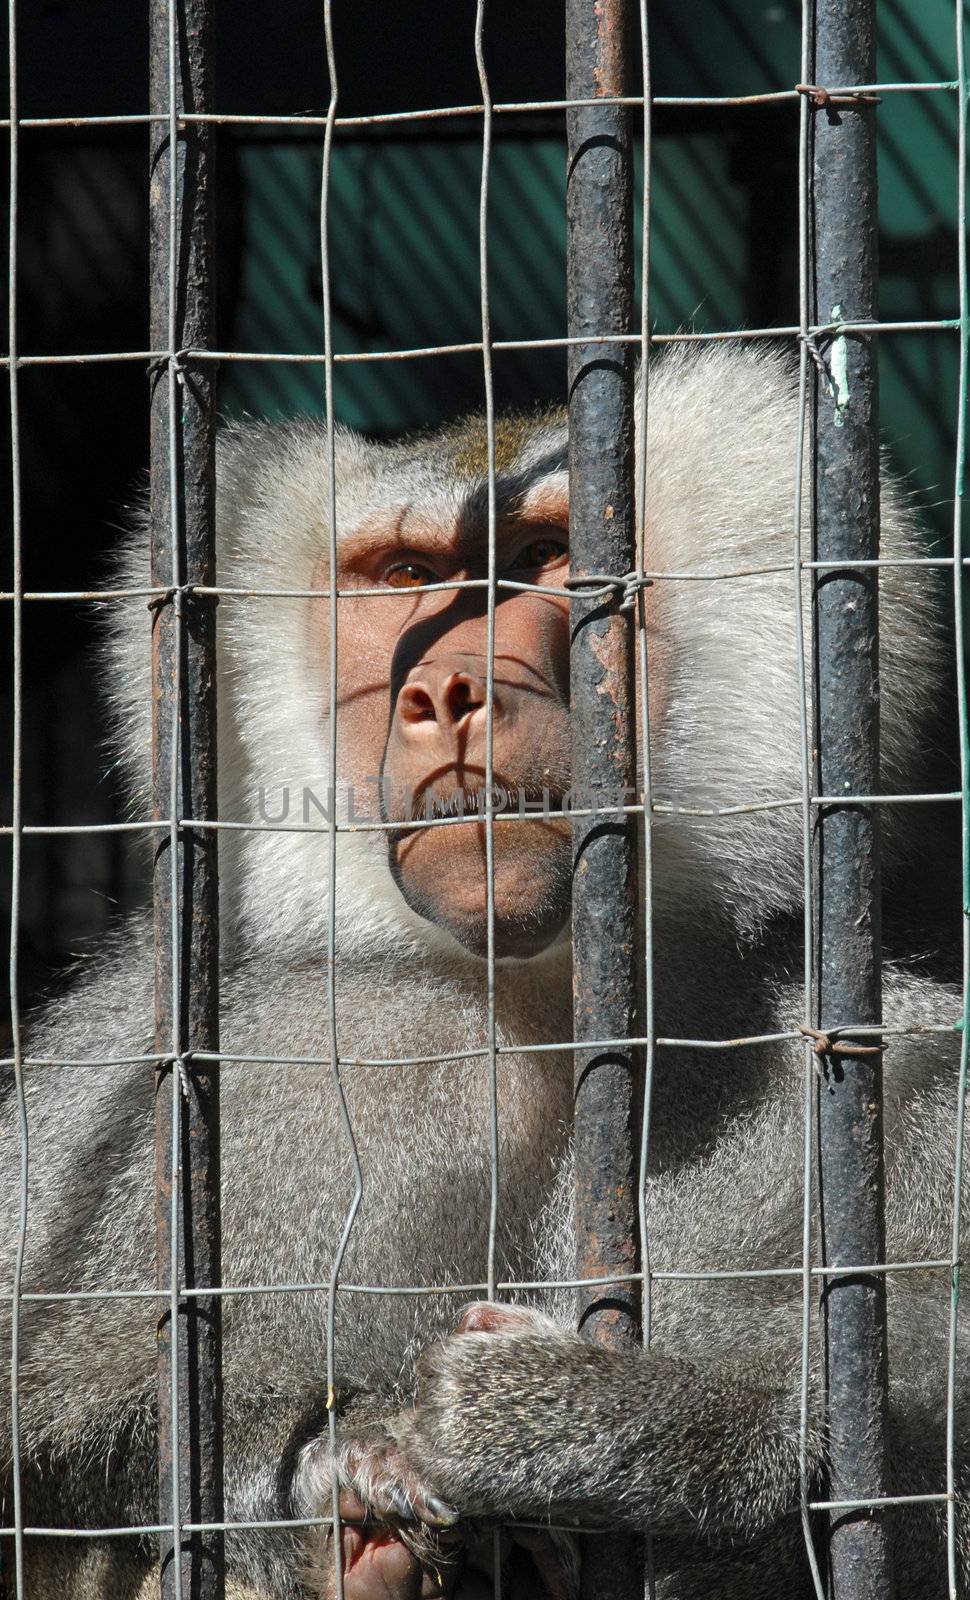 Mandrill monkey with sadness in his eyes as he looks through his cage